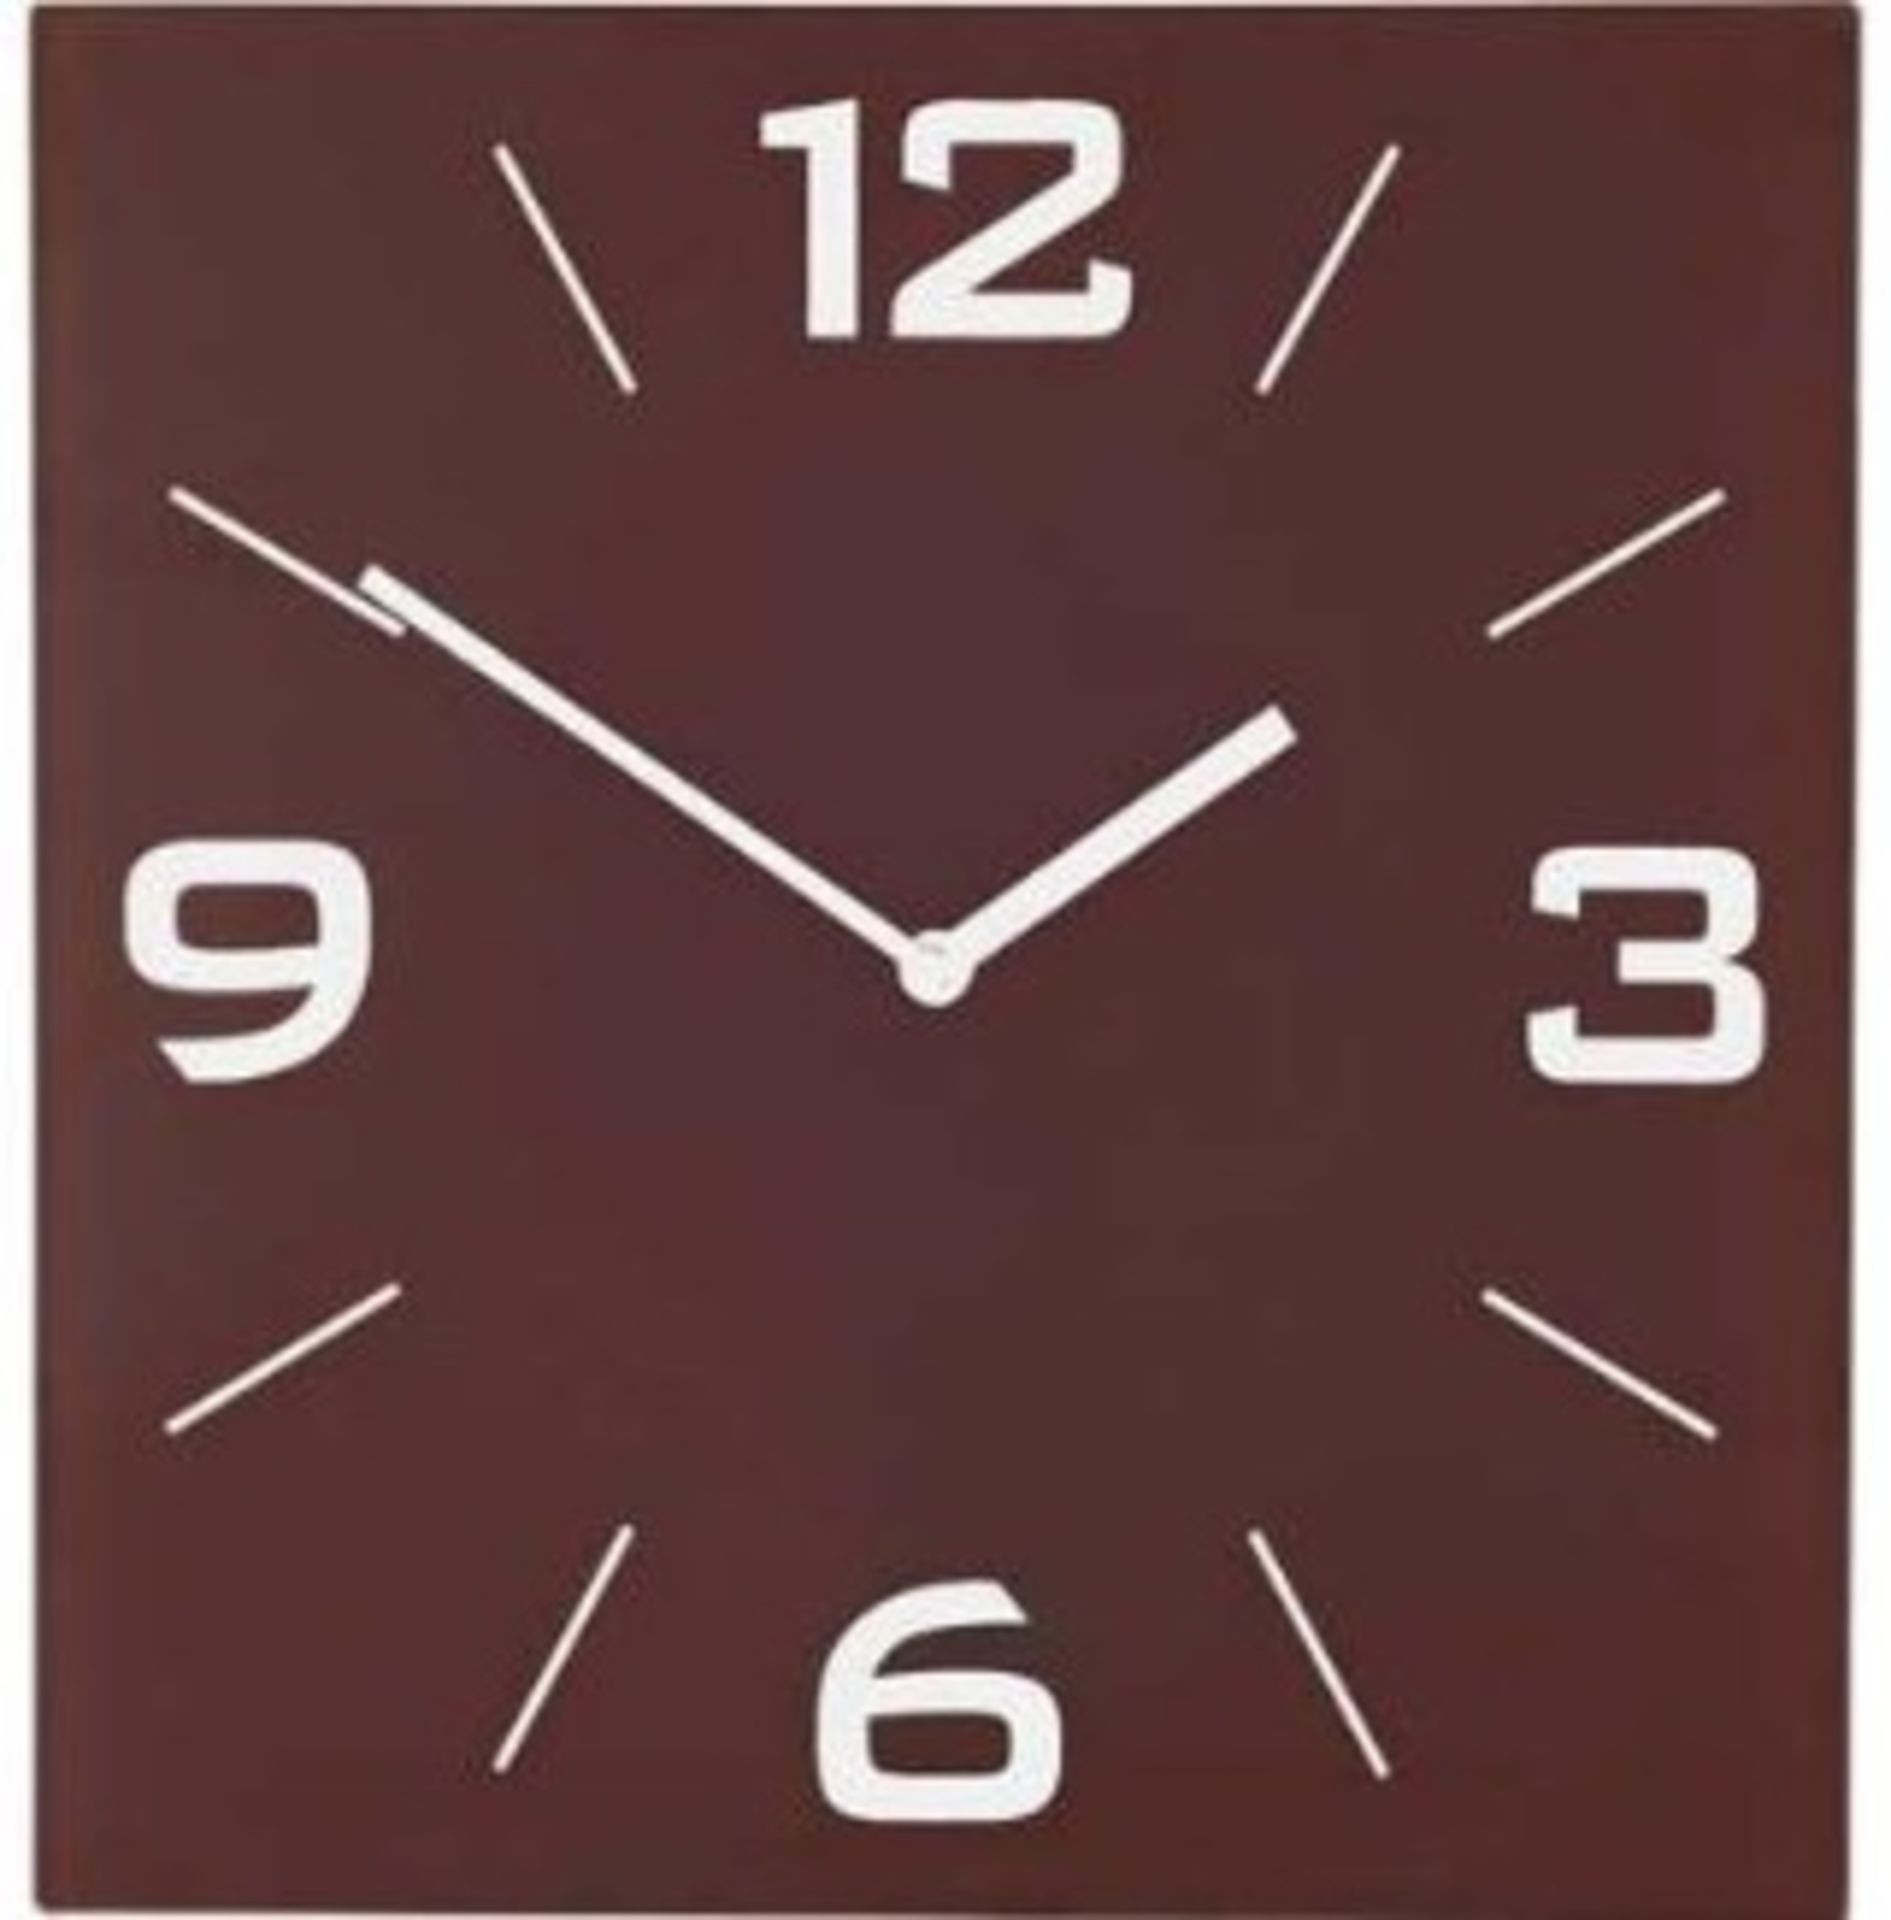 4 x Colour Match Square Wall Clocks - Chocolate Glass Case with Silver Hands and Quartz Movement -